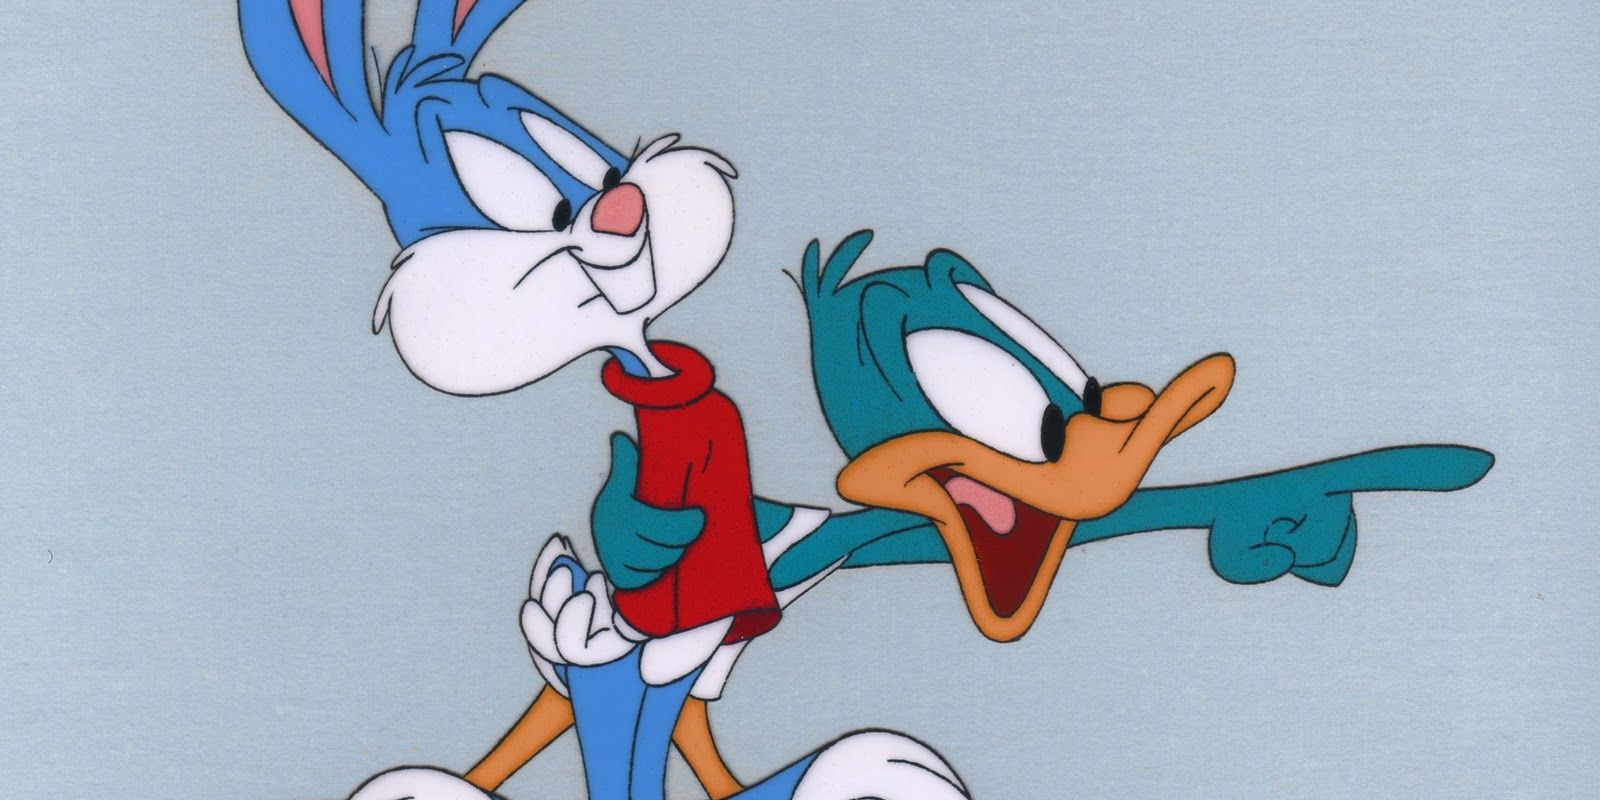 A picture of Buster Bunny and Plucky Duck together is shown.